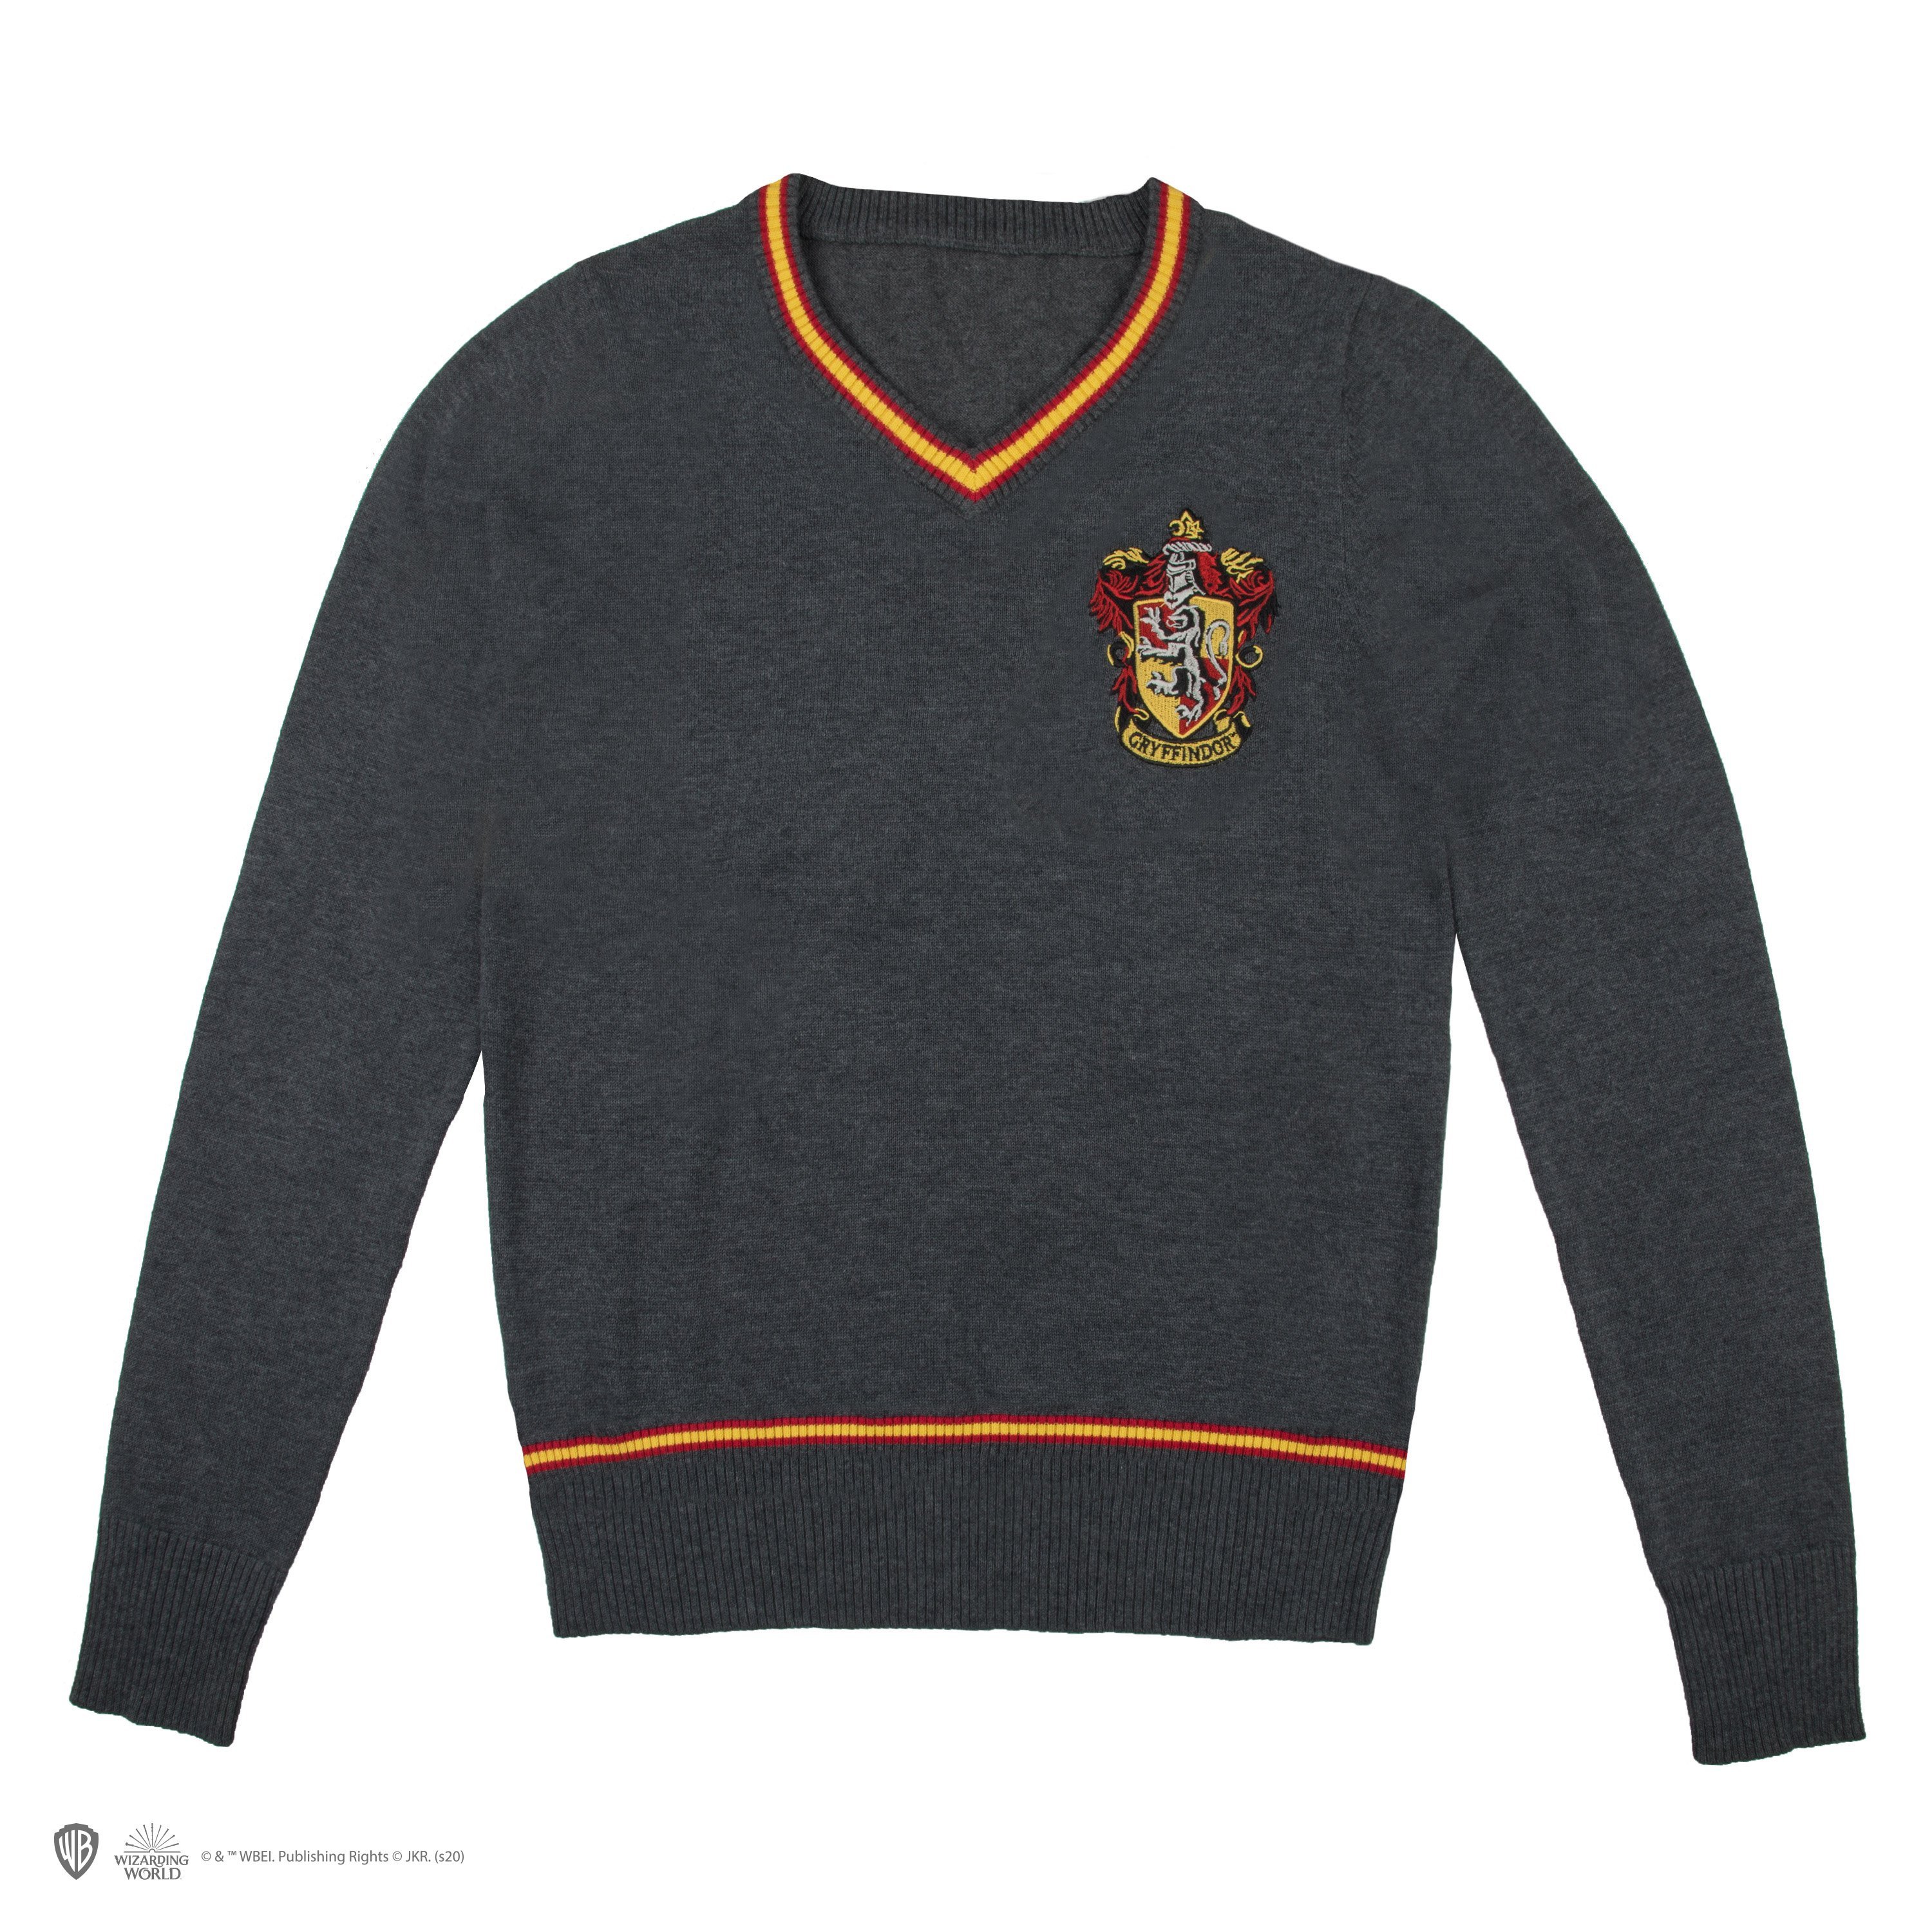 Harry Potter - Gryffindor - Grey Knitted Sweater - Large - Fan-shop